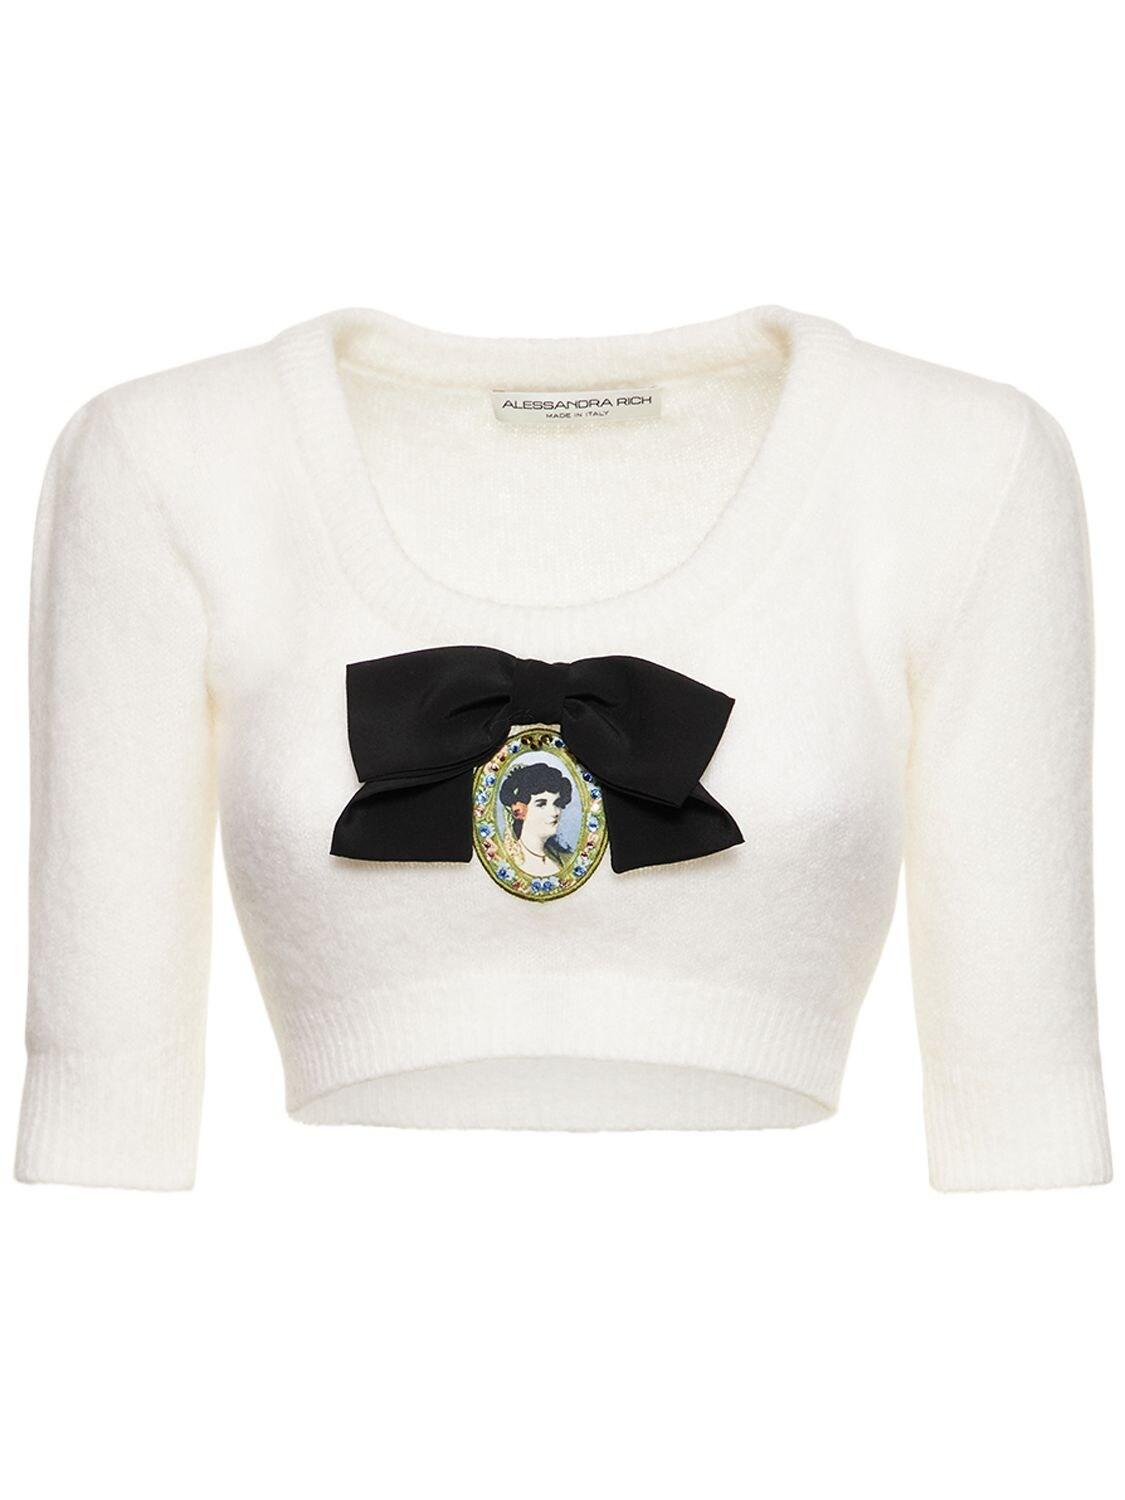 Alessandra Rich Mohair Blend Knitted Bow Crop Top in White | Lyst